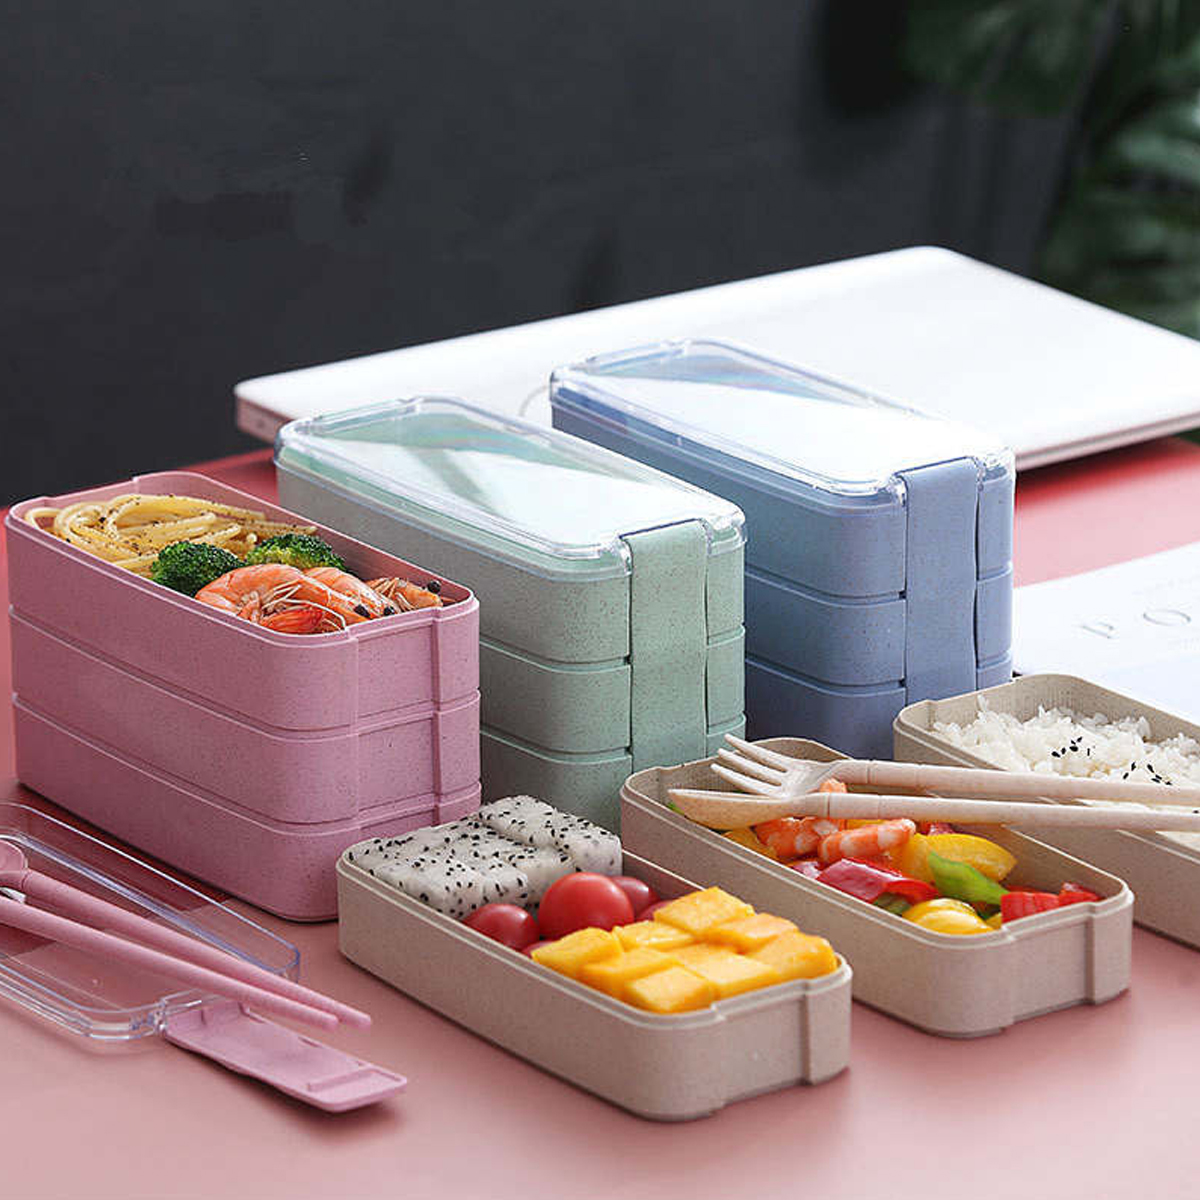 Lunch Box Bento 3 Compartments - Easy Sushi®